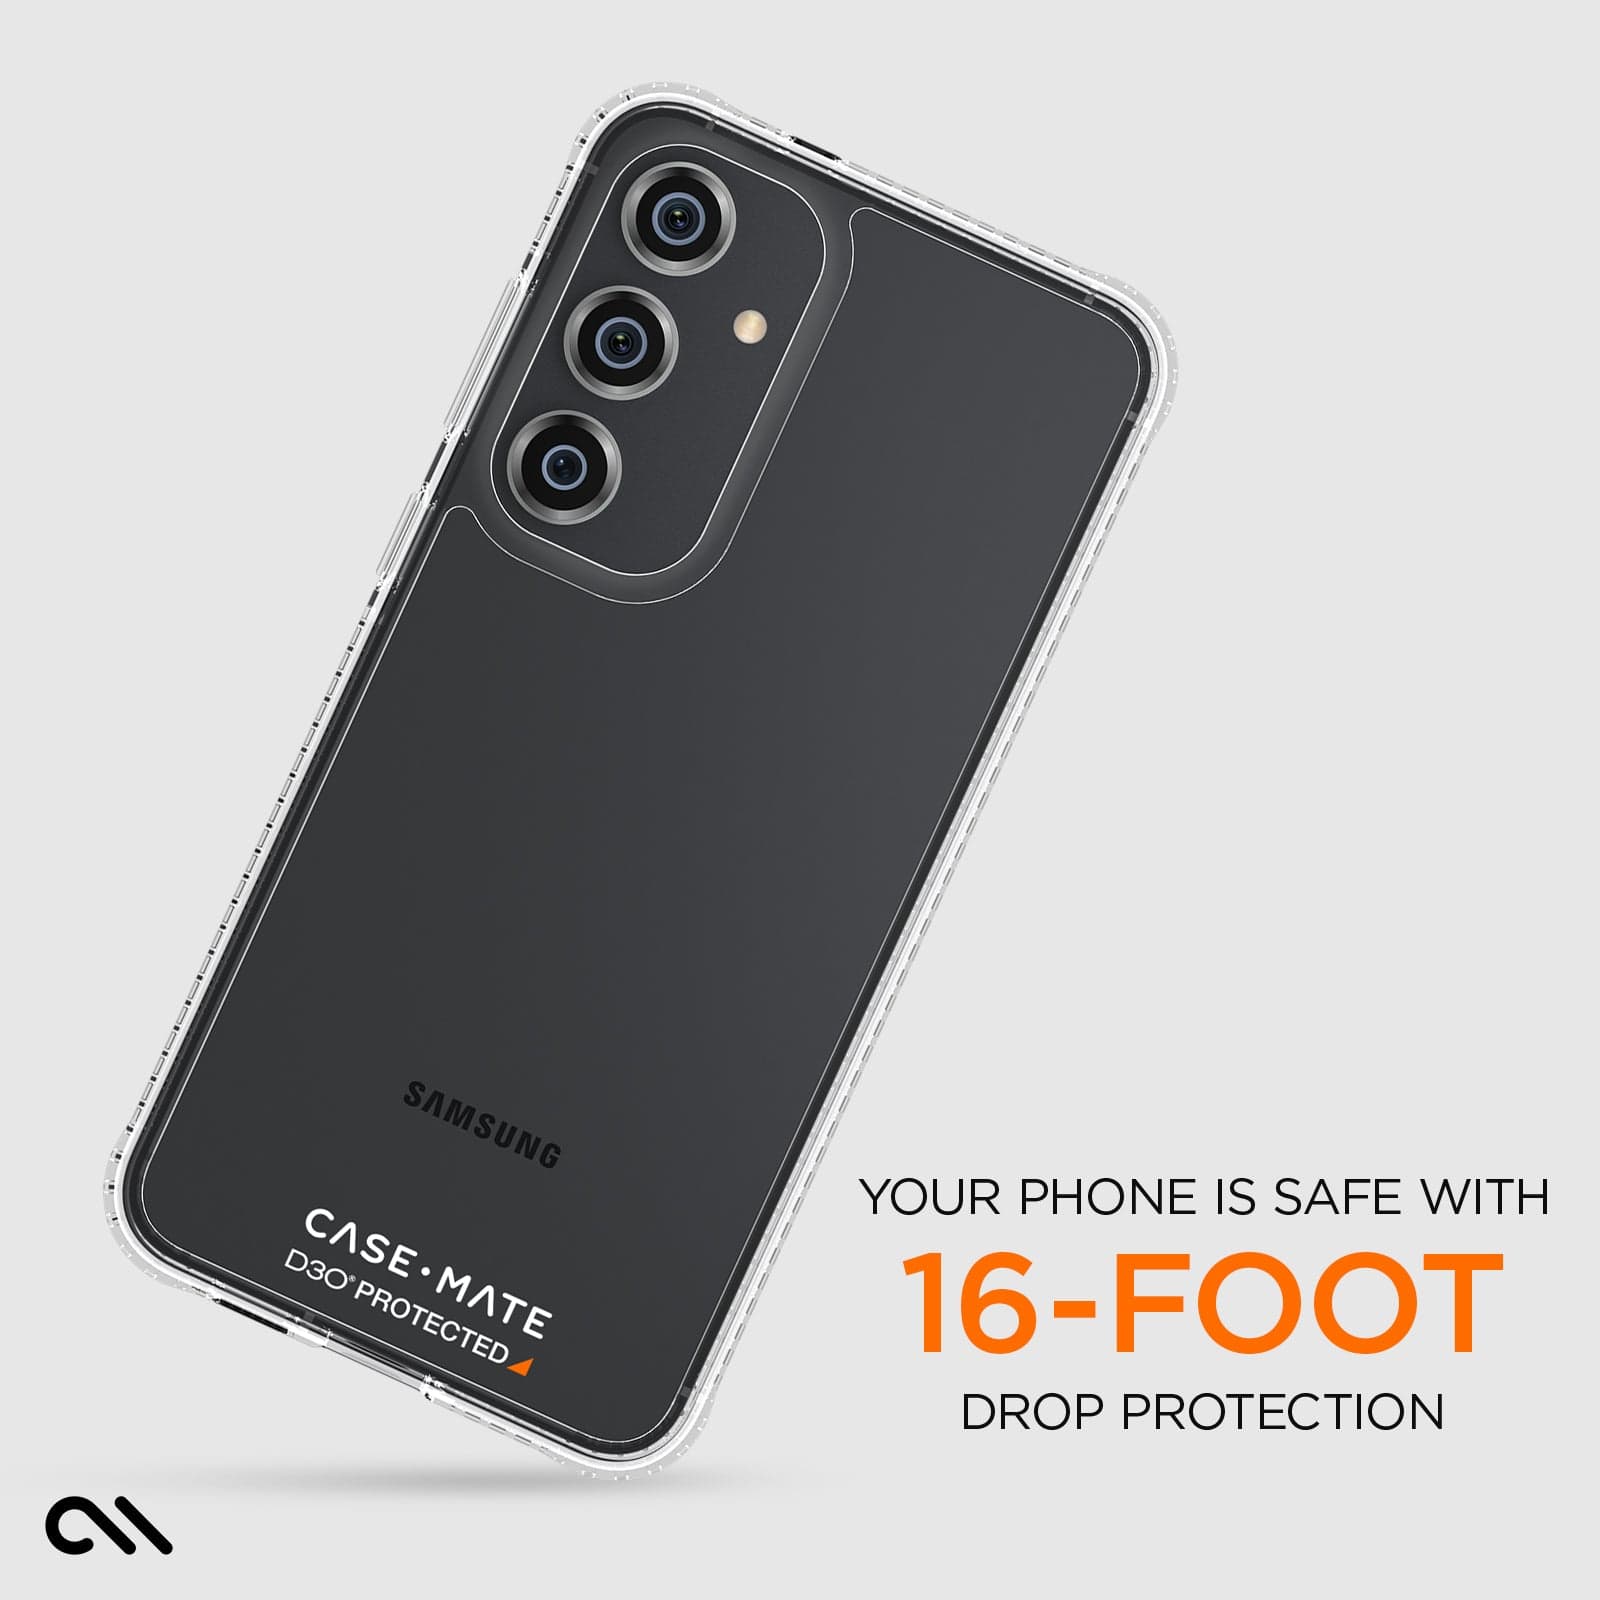 YOUR PHONE IS SAFE WIH 16-FOOT DROP PROTECTION